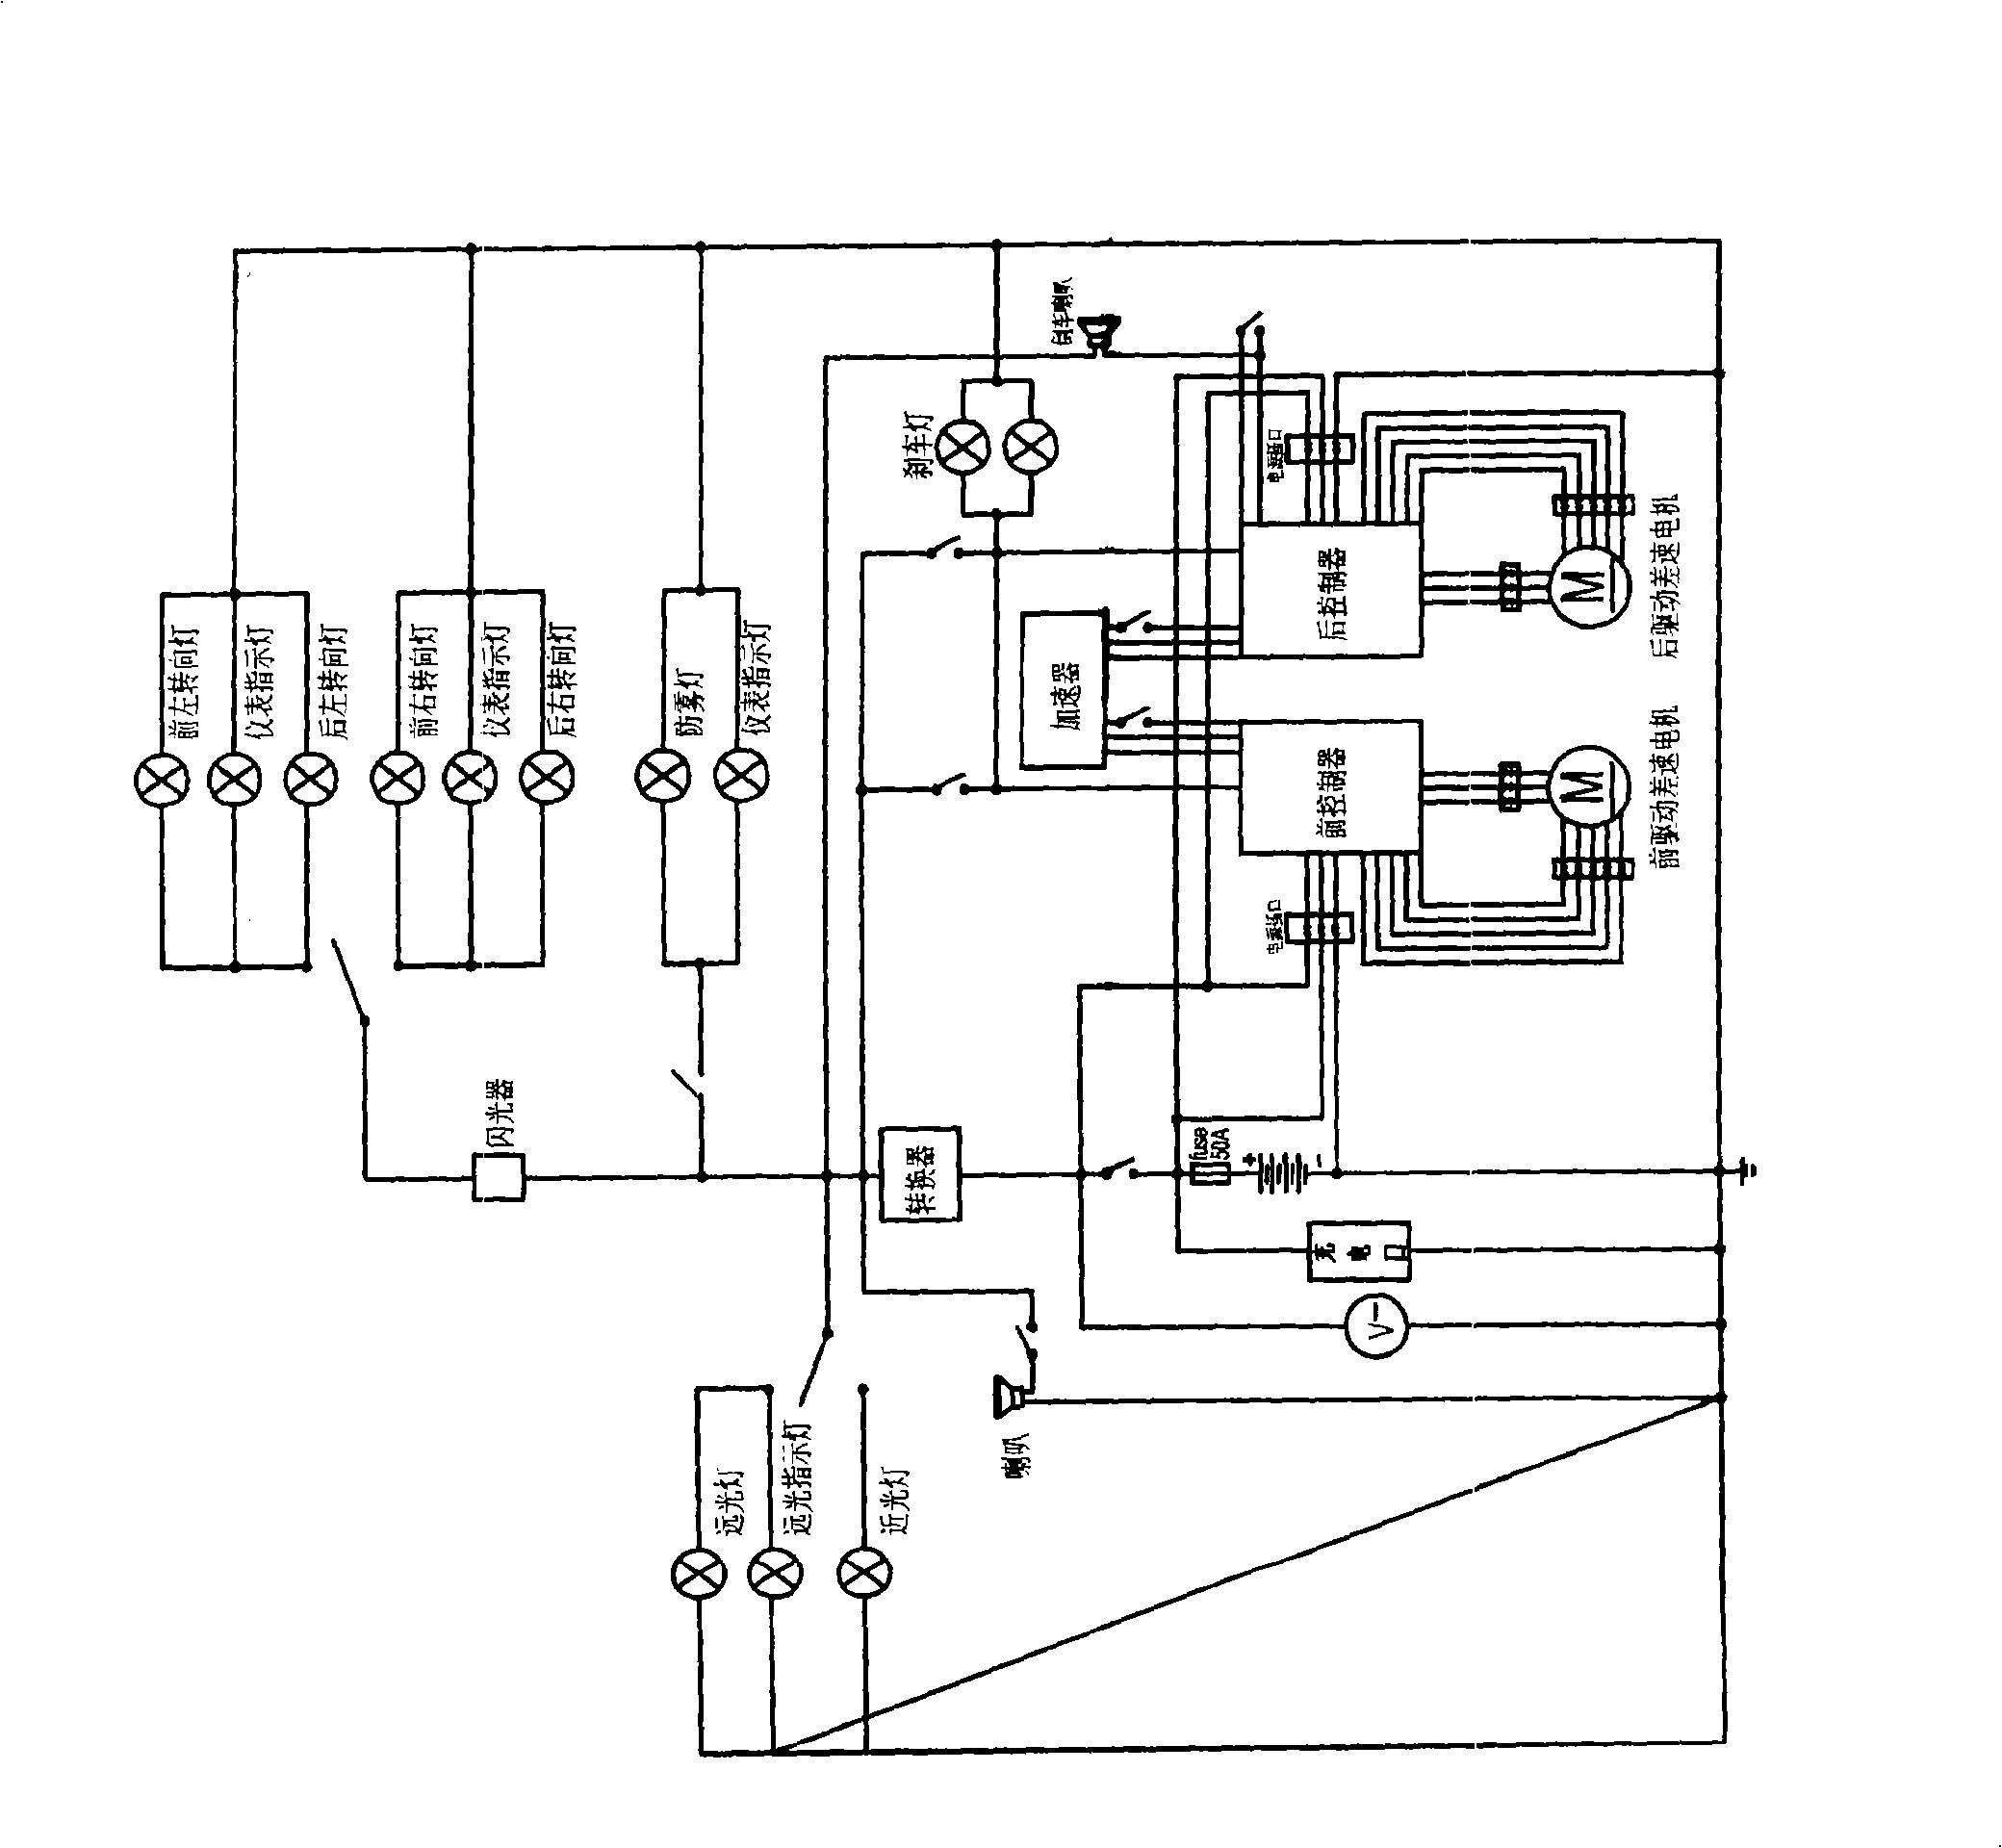 Control system of dual-drive electric automobile